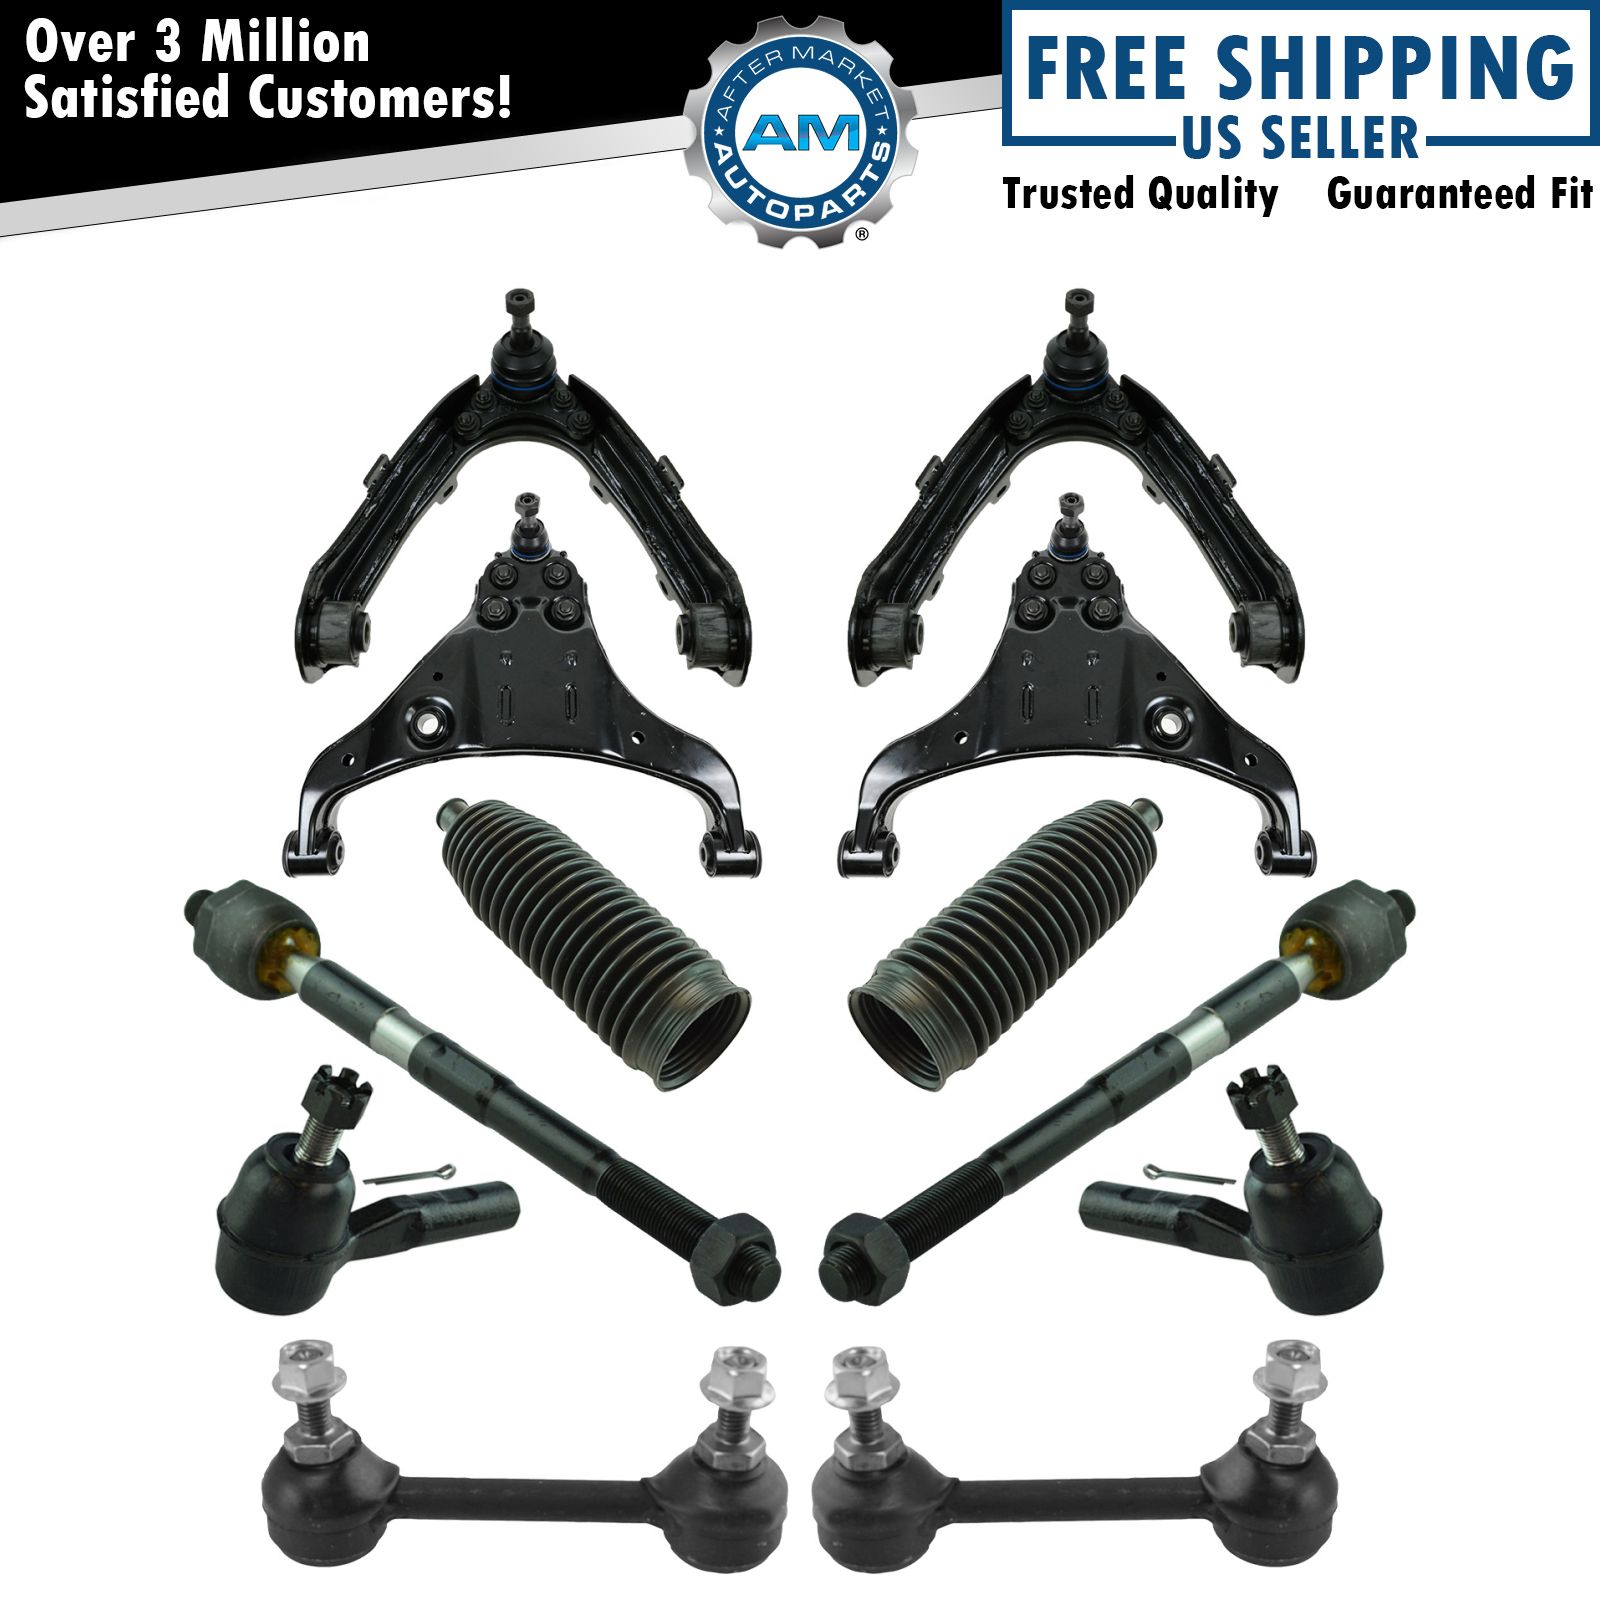 Front Steering & Suspension Kit Fits 2007-2012 Chevrolet Colorado GMC Canyon